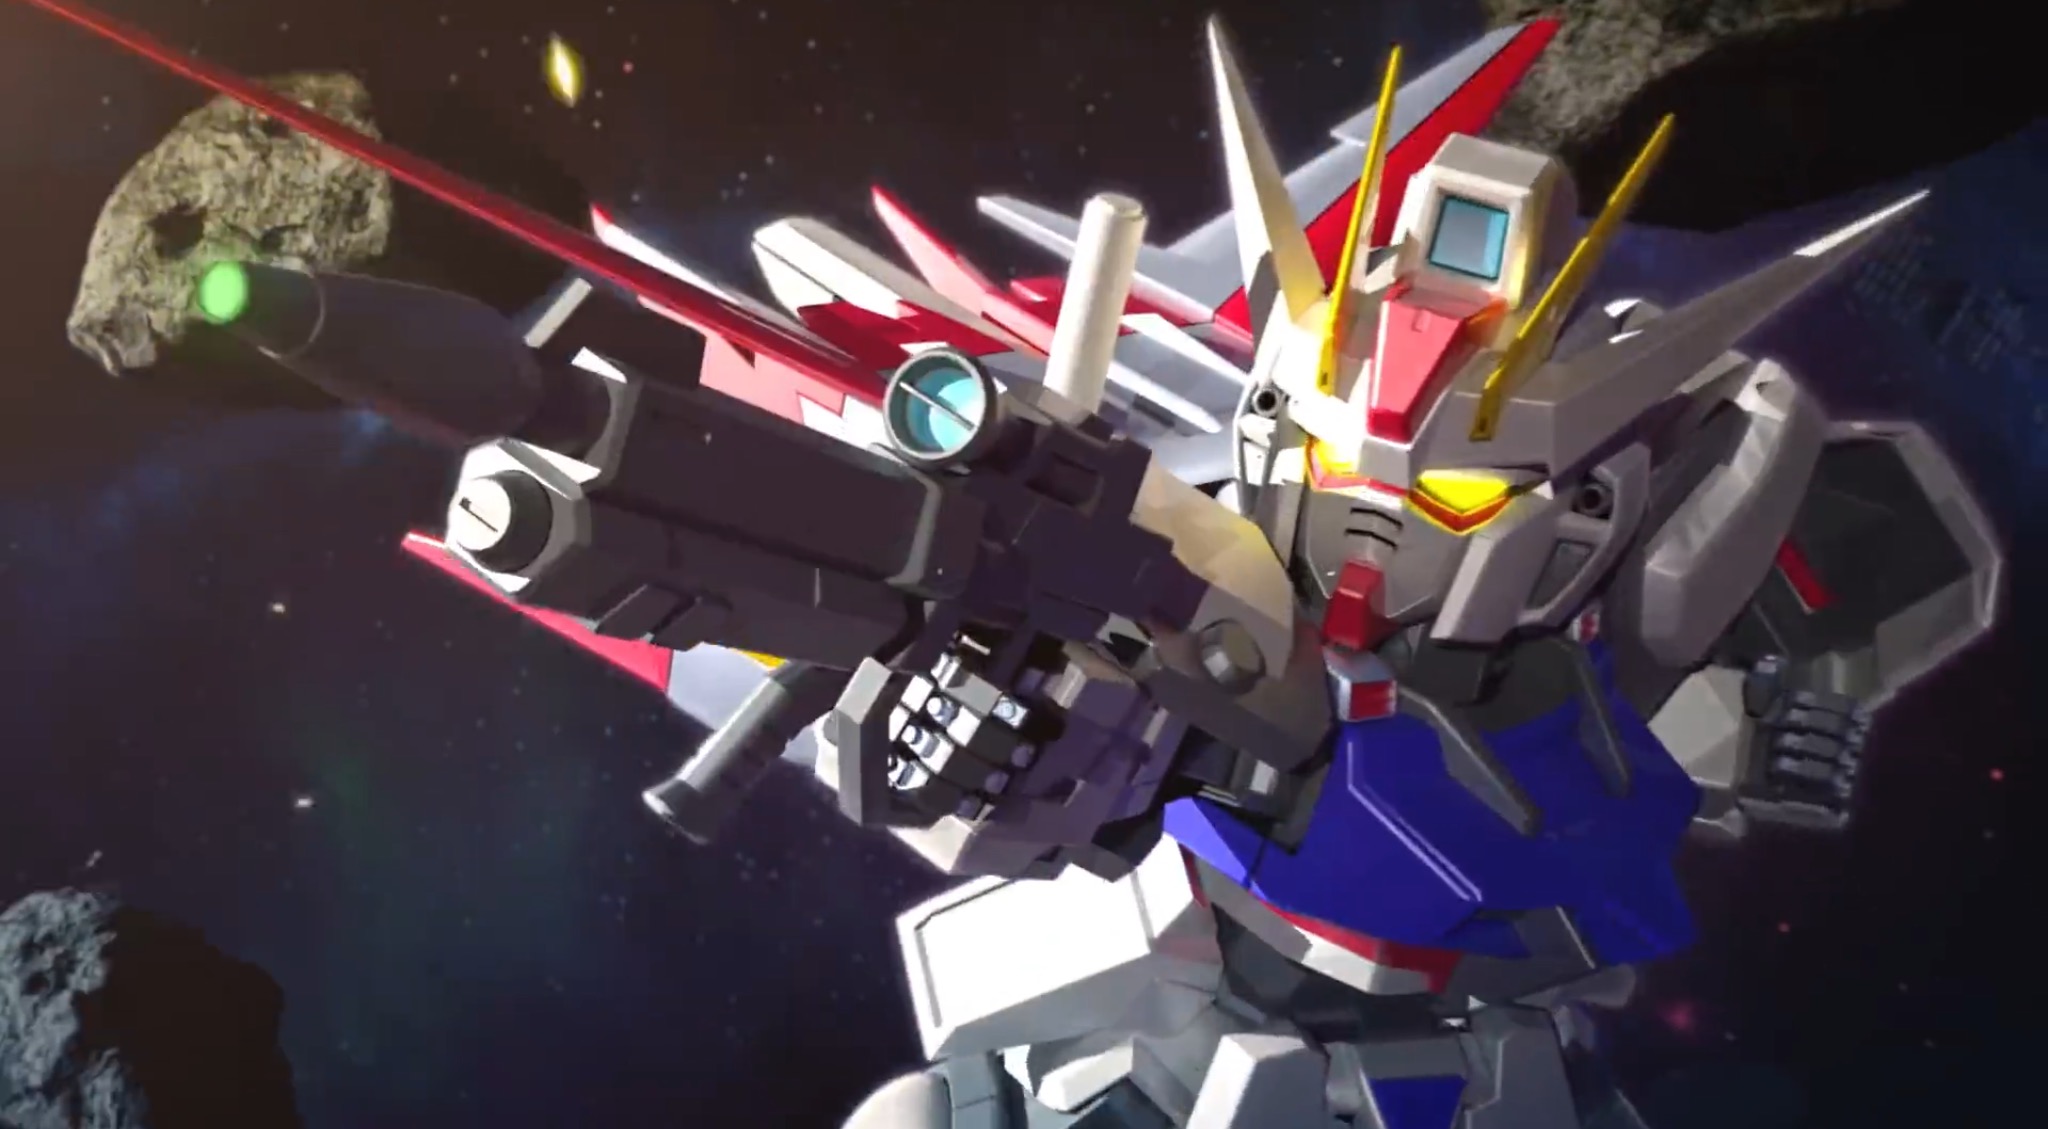 ‘Super Robot Wars DD’ Announced For iOS And Android In Japan